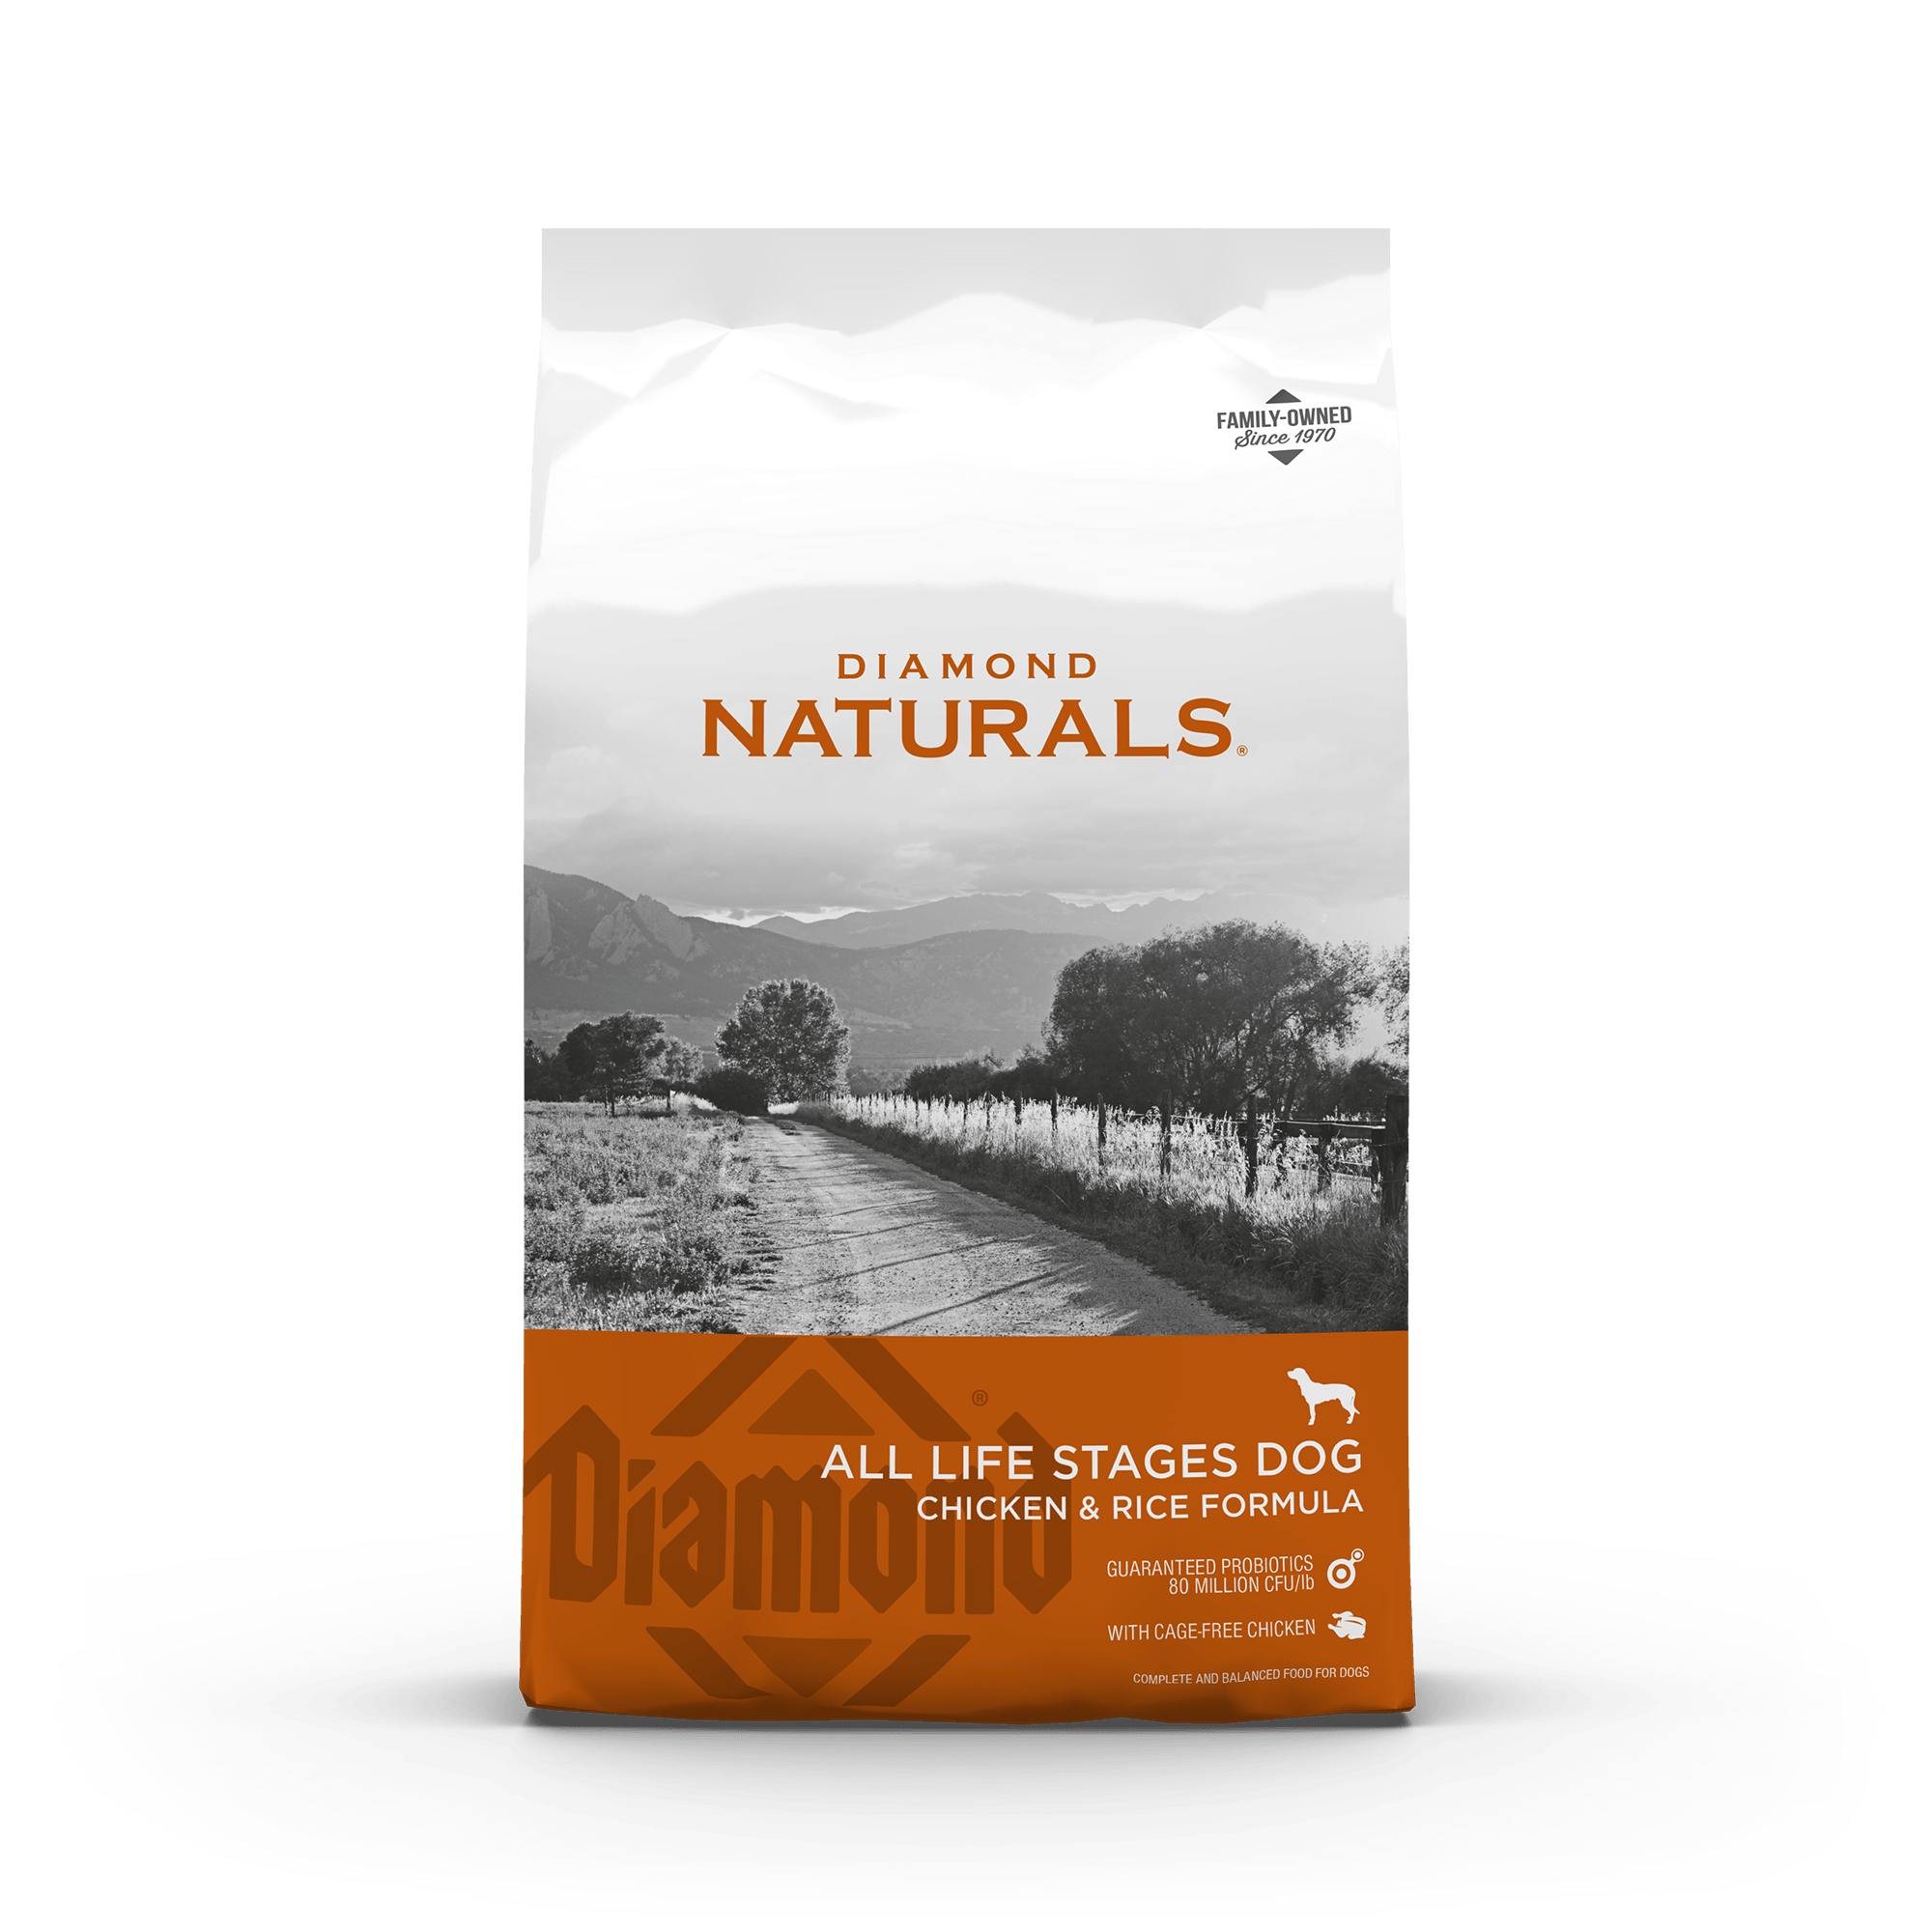 Diamond Naturals All Life Stages Dog Chicken & Rice Formula product packaging